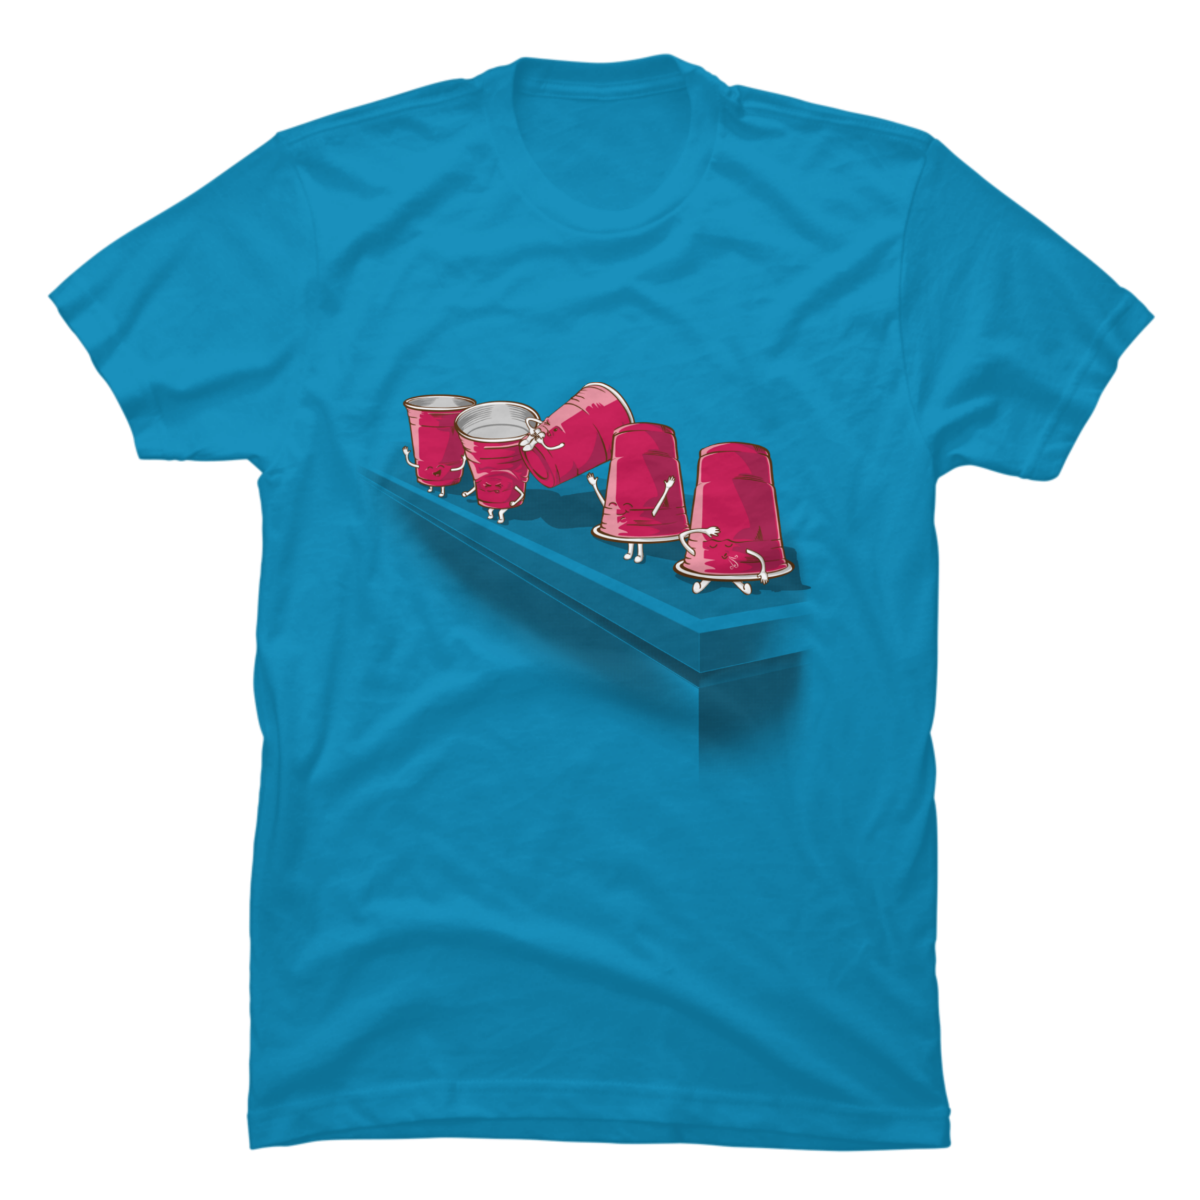 flippy cup t shirts